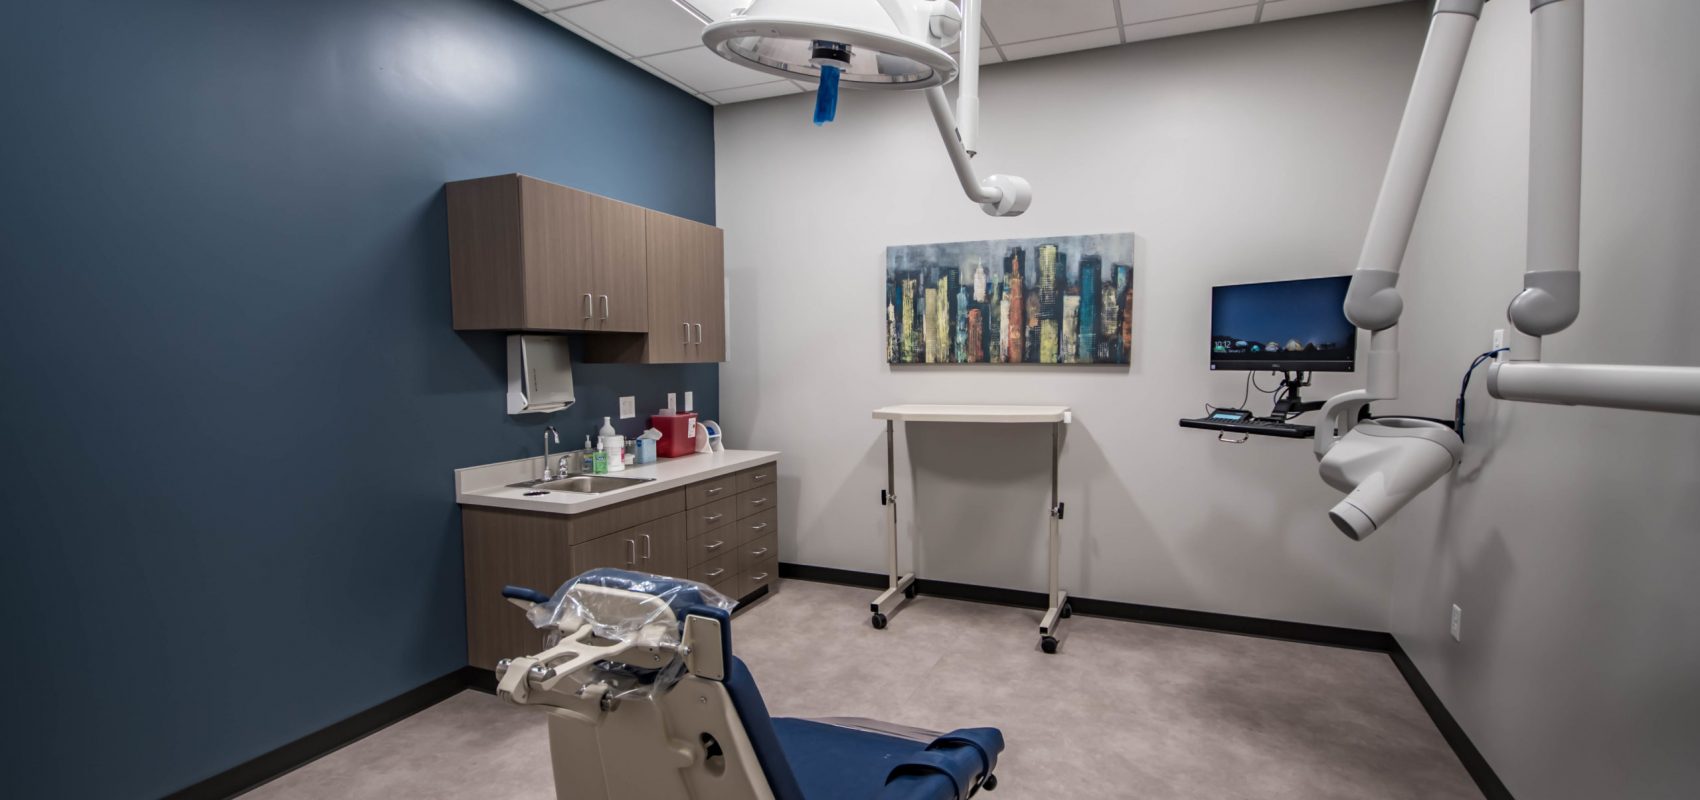 MKE Oral Surgery_January 27, 2020_043-HDR